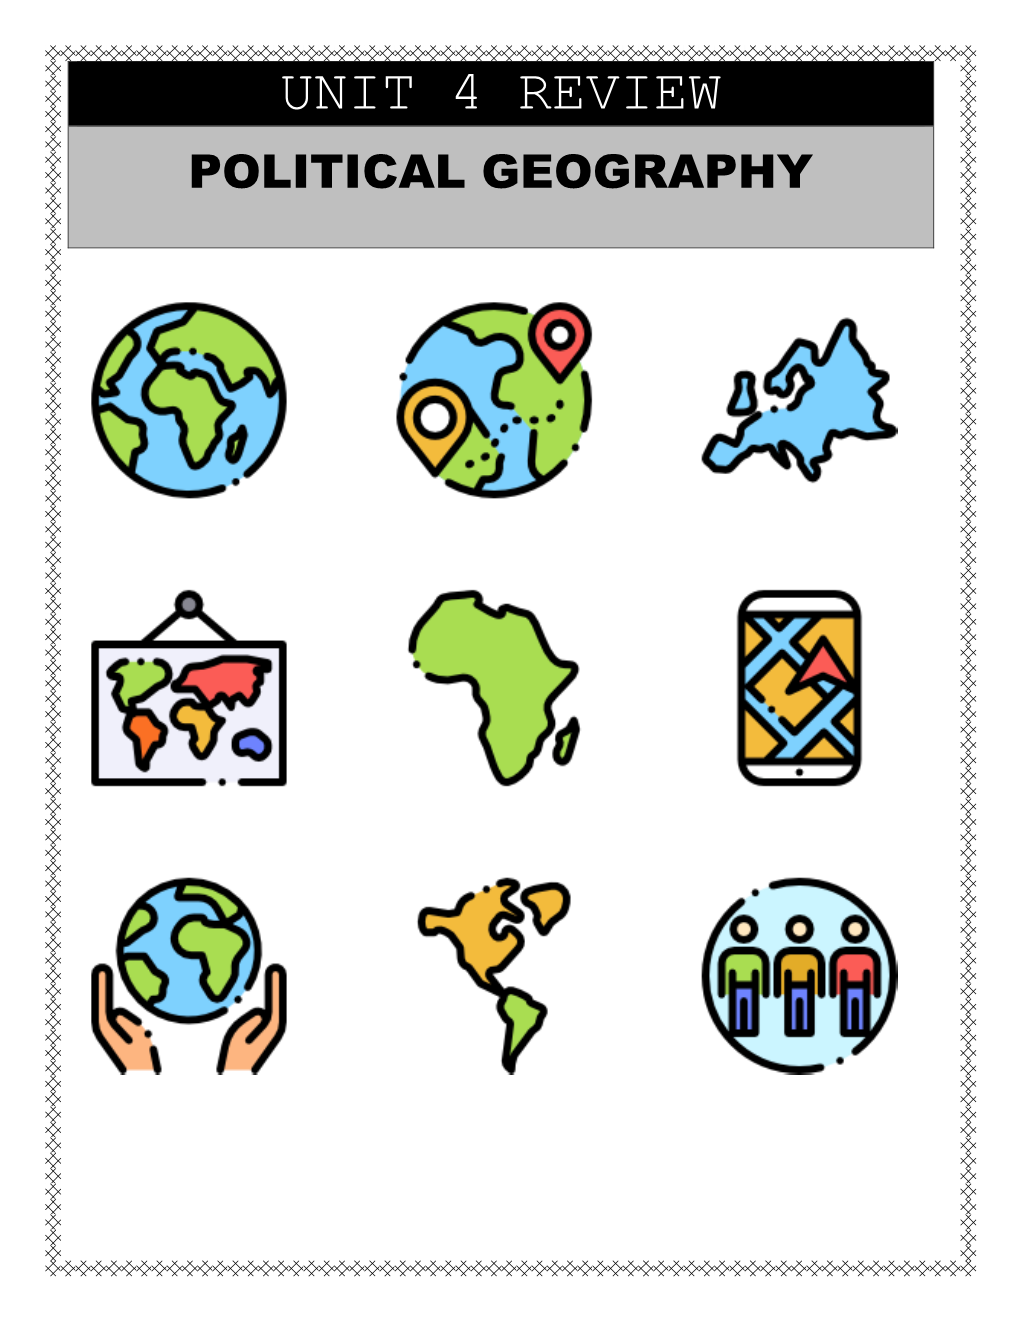 Unit 4 Review Political Geography